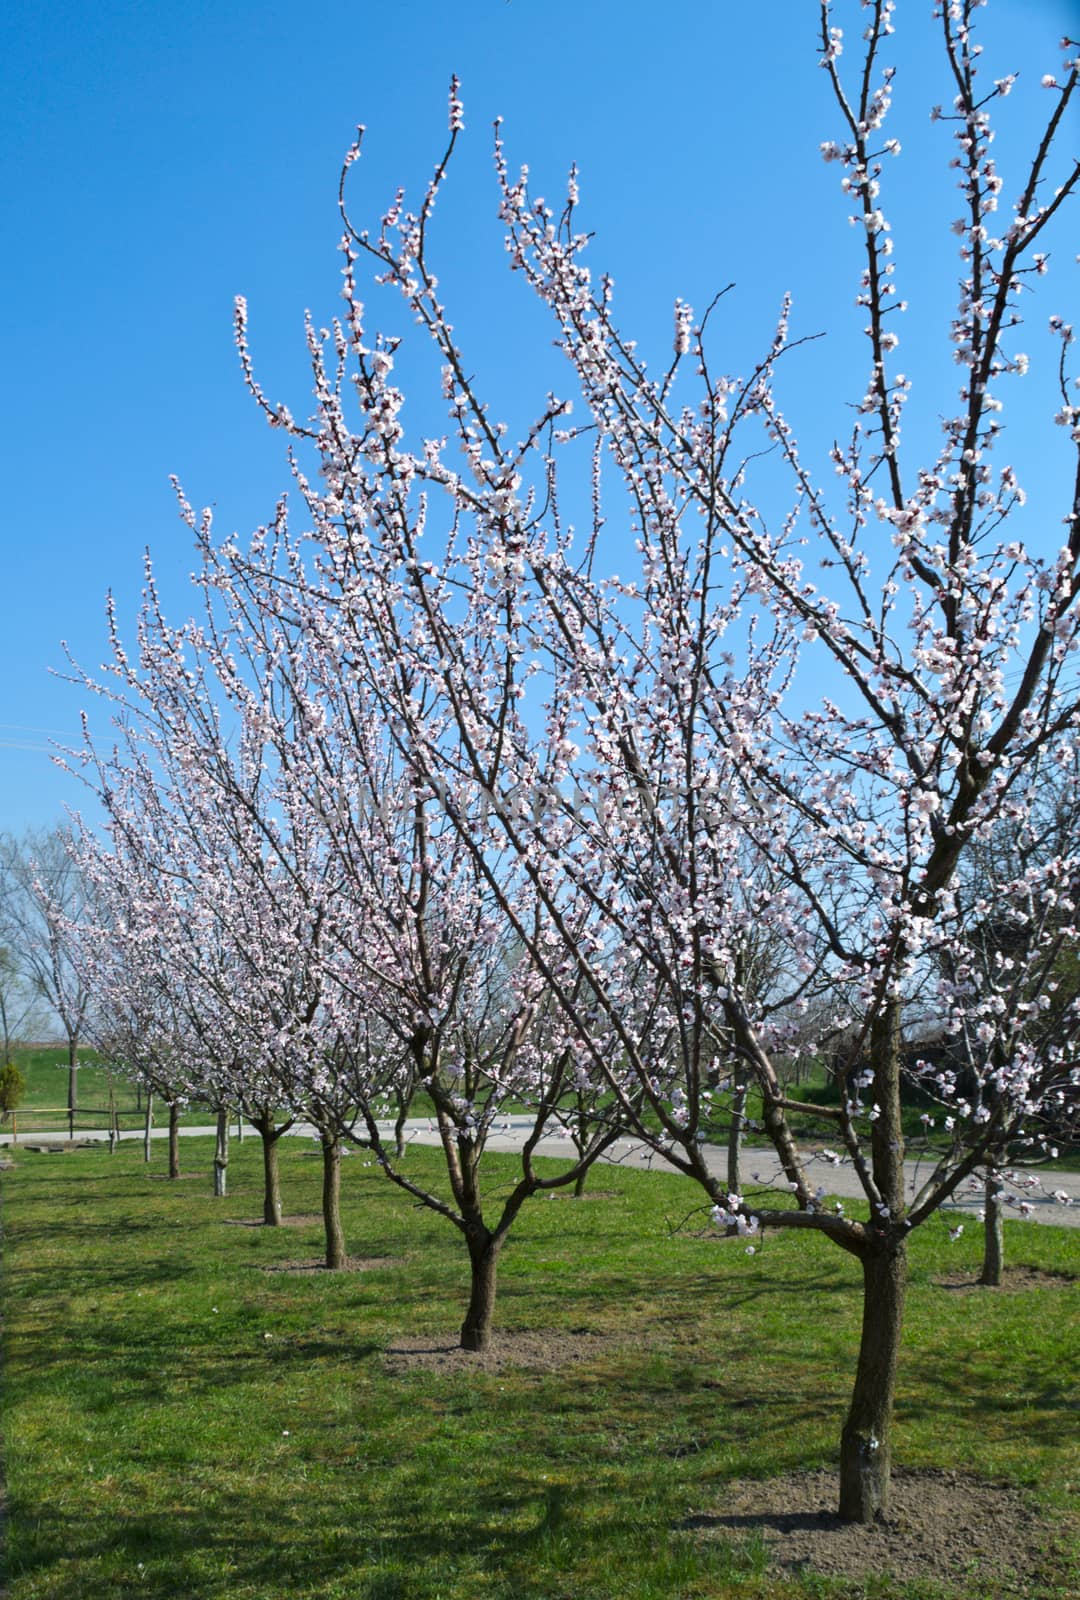 Flowering apricot trees at sprig time